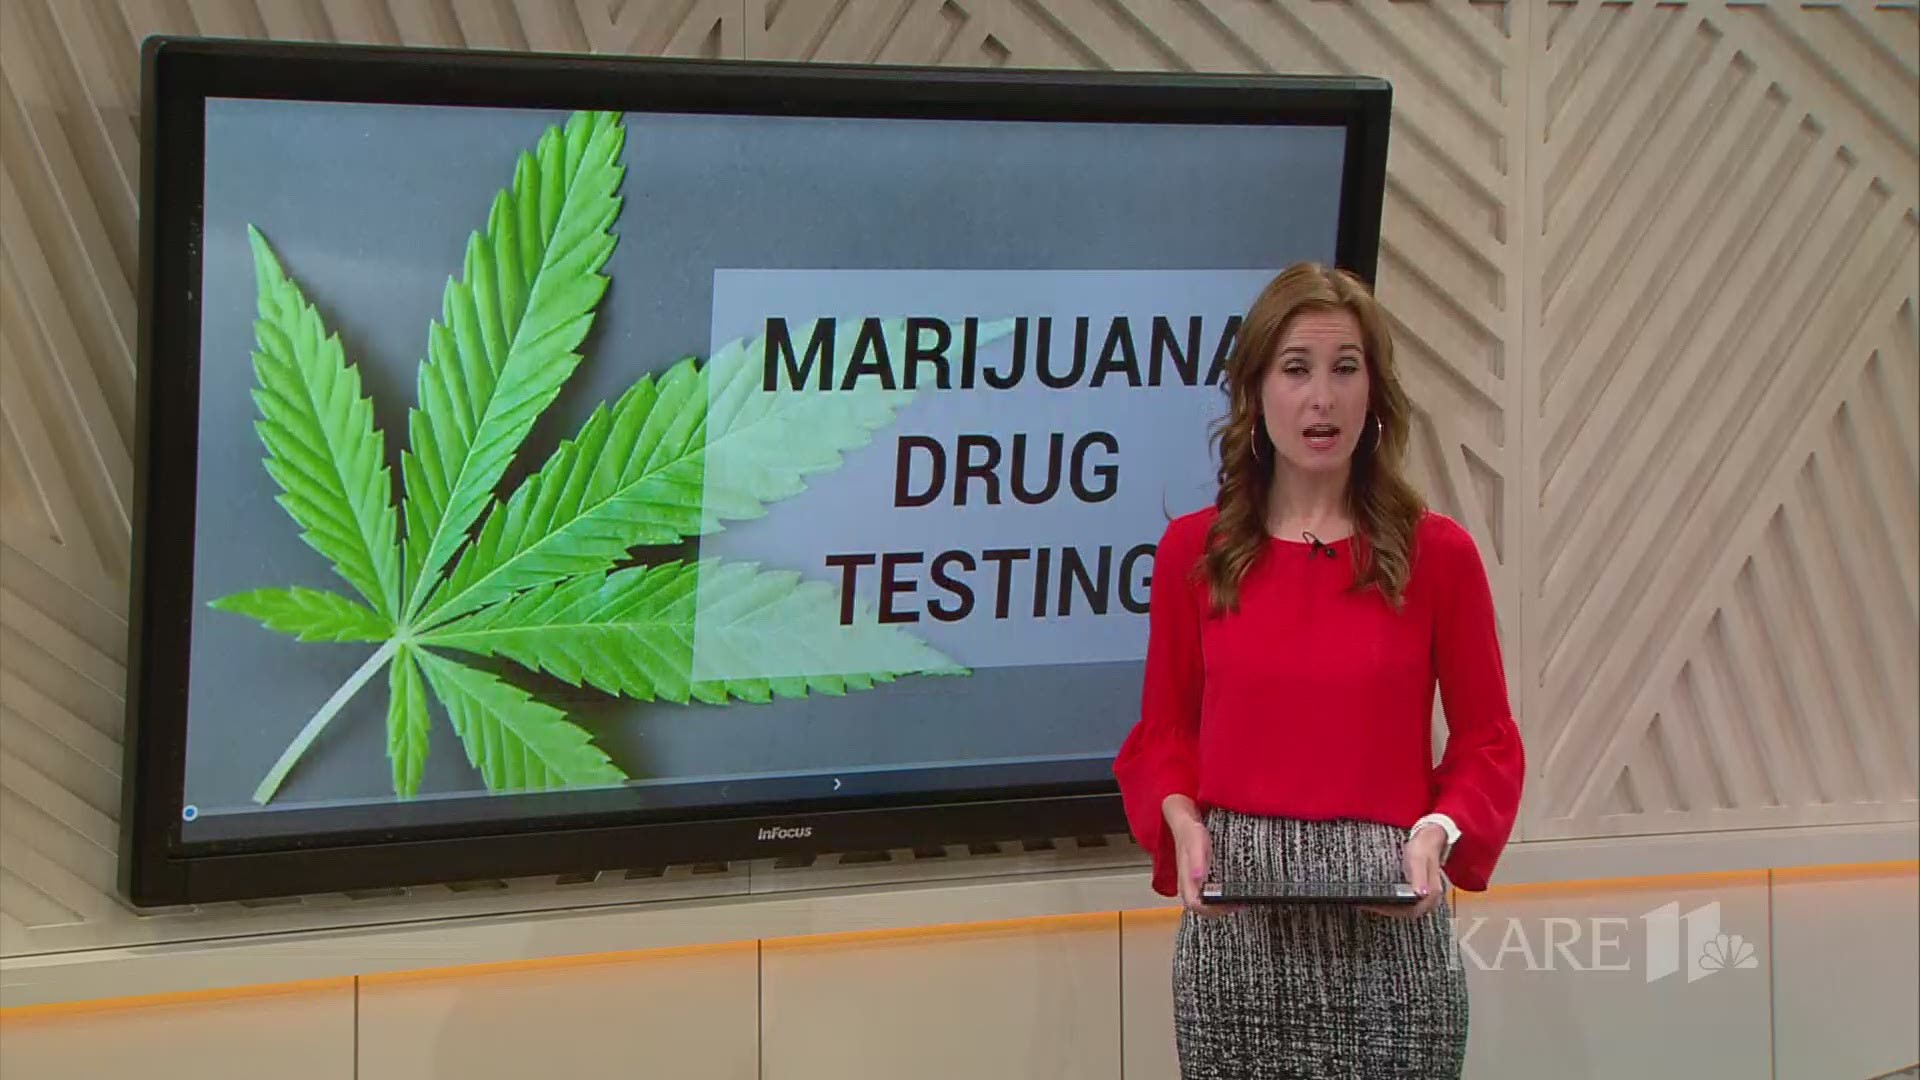 Nevada just became the first state in the U.S. to ban pre-employment marijuana testing. In today's Digital Dive, we look at the implications - and hear your opinions on the law. https://kare11.tv/2KfrjGg